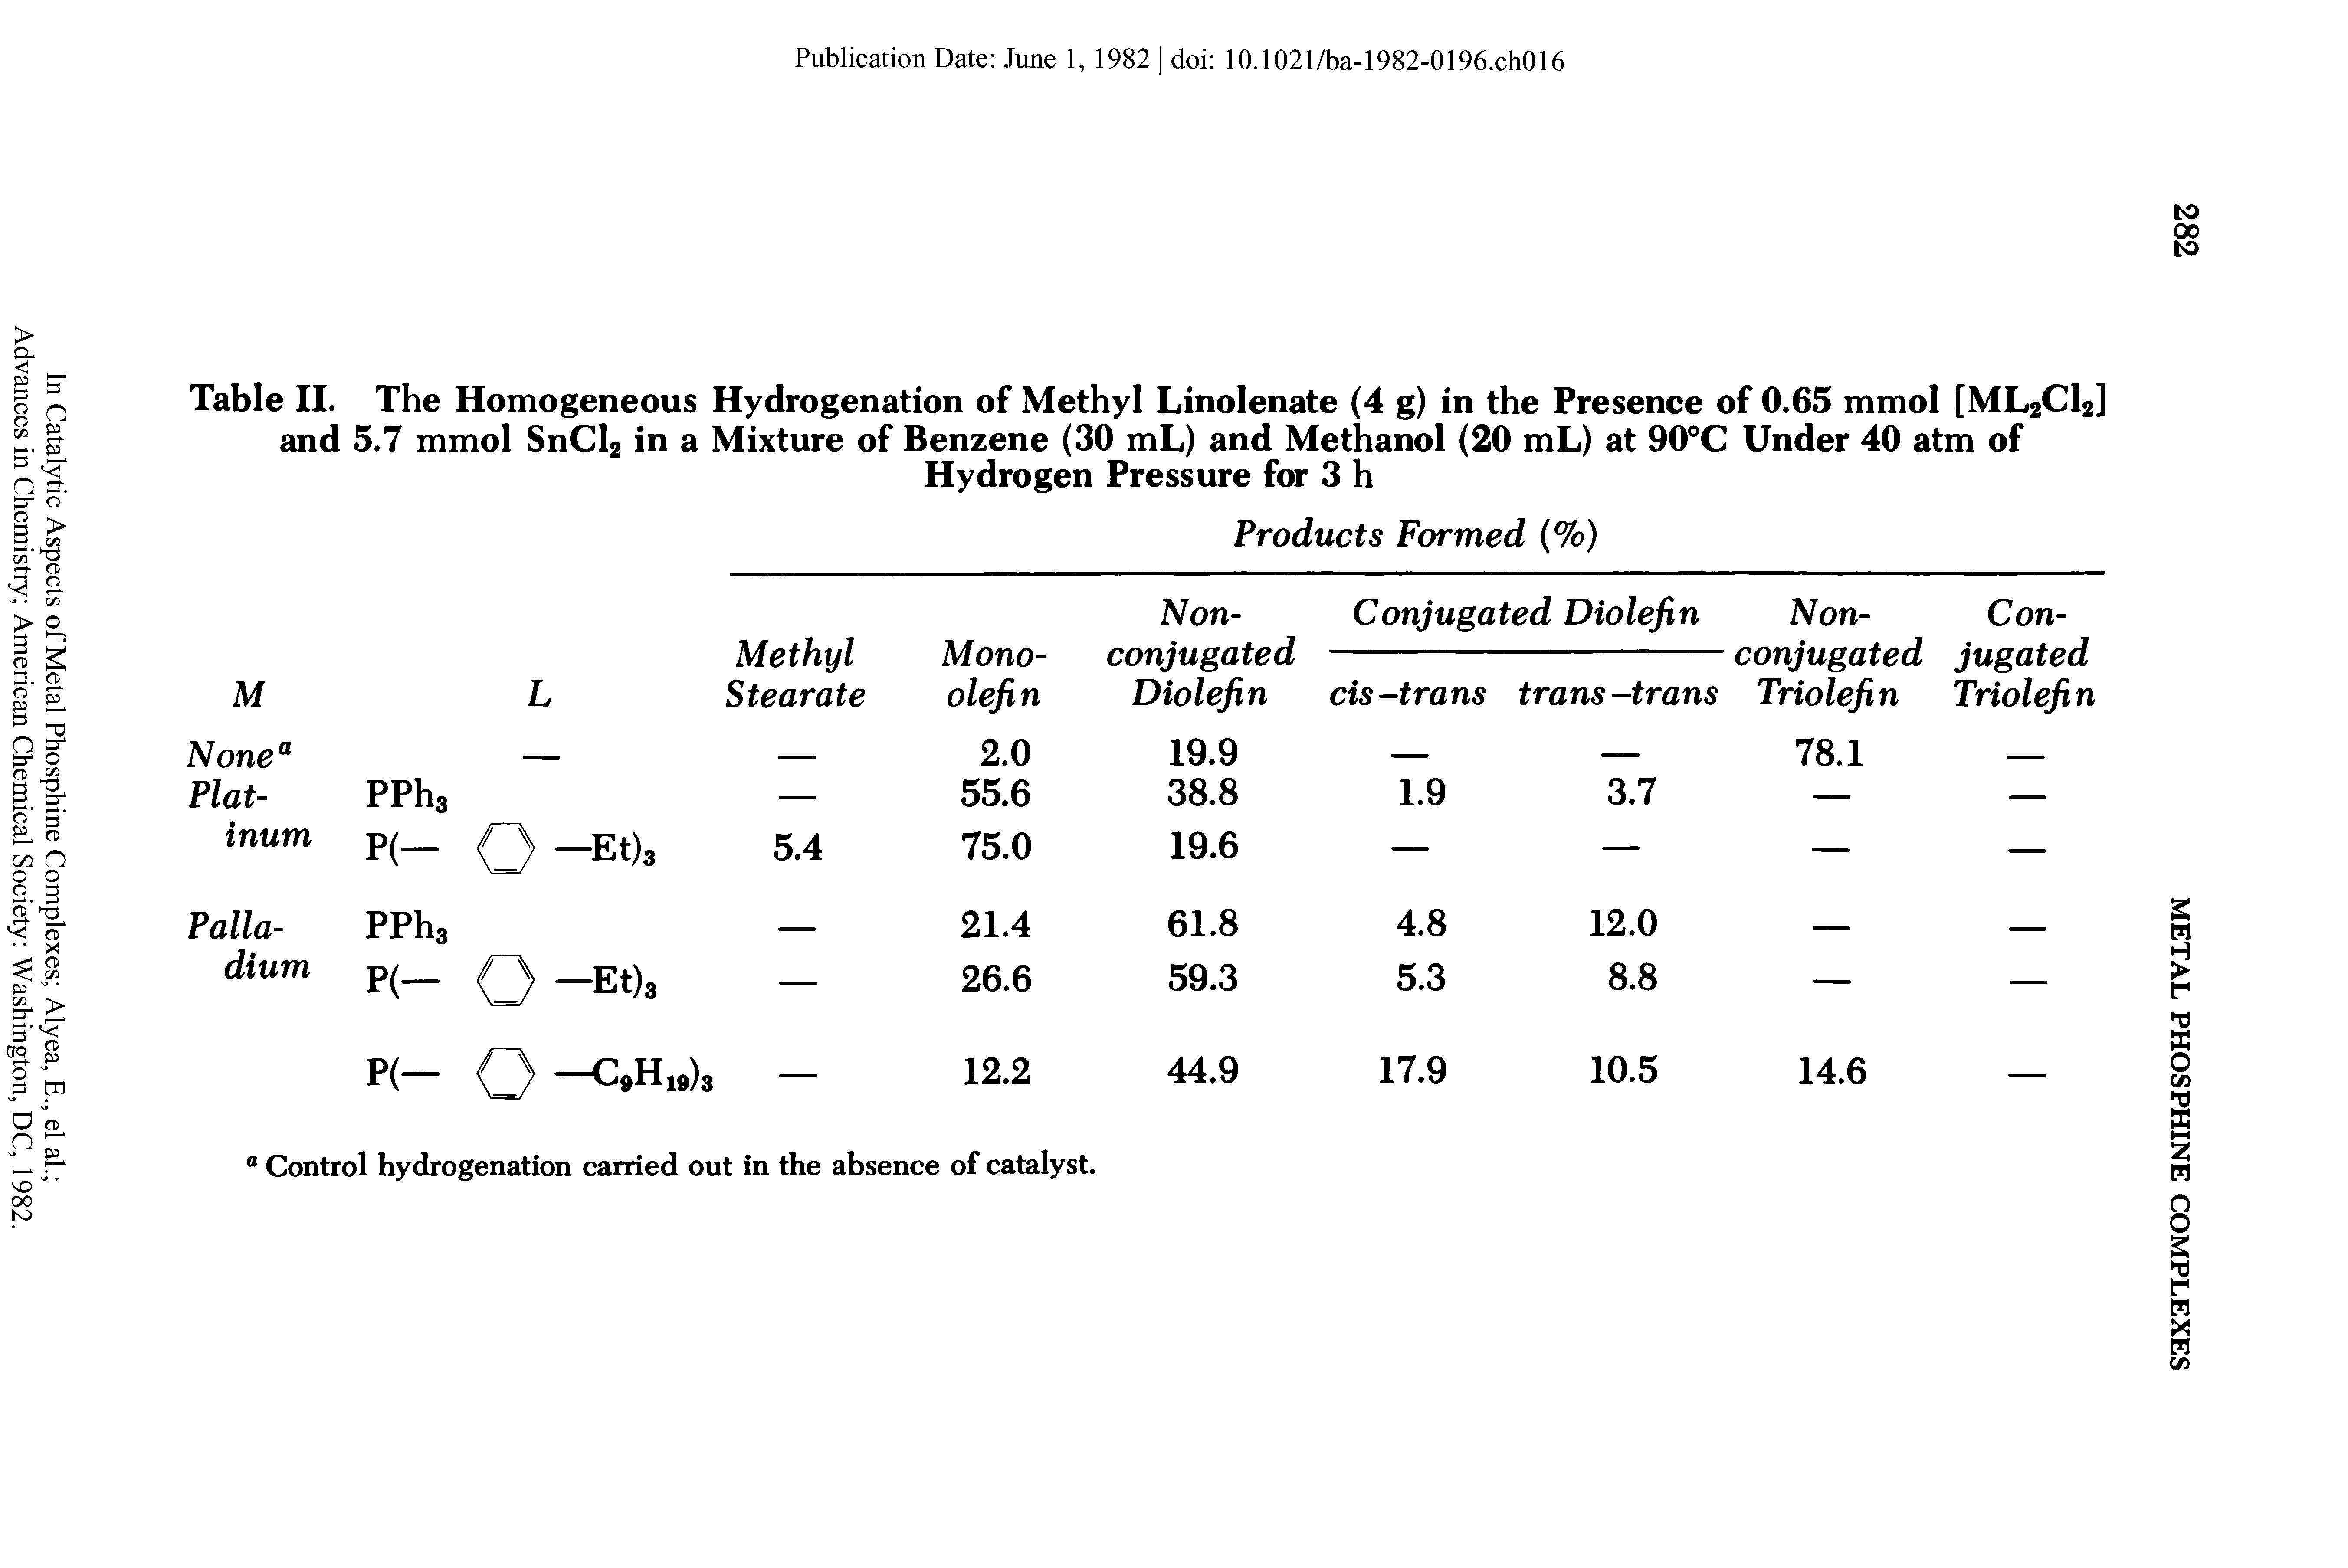 Table II. The Homogeneous Hydrogenation of Methyl Linolenate (4 g) in the Presence of 0.65 mmol [ML2C12] and 5.7 mmol SnCl2 in a Mixture of Benzene (30 mL) and Methanol (20 mL) at 90°C Under 40 atm of...